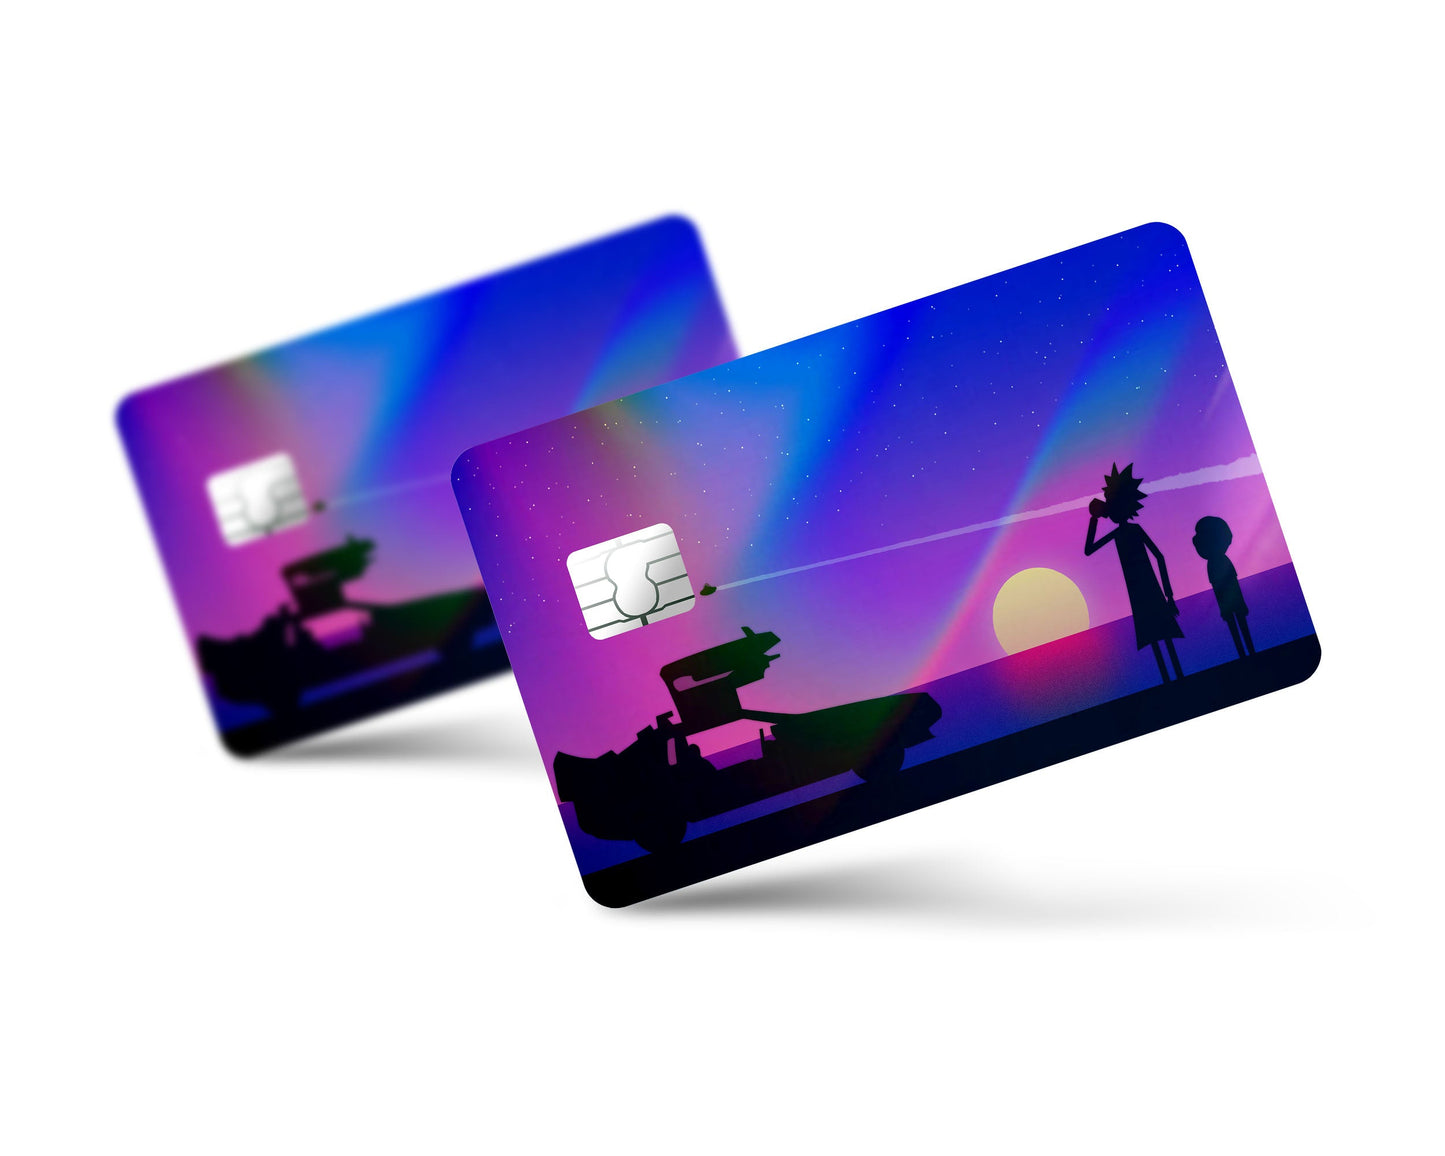 Anime Town Creations Holographic Credit Card Rick and Morty Back to Time Travel Full Skins - Anime Rick and Morty Holographic Credit Card Skin